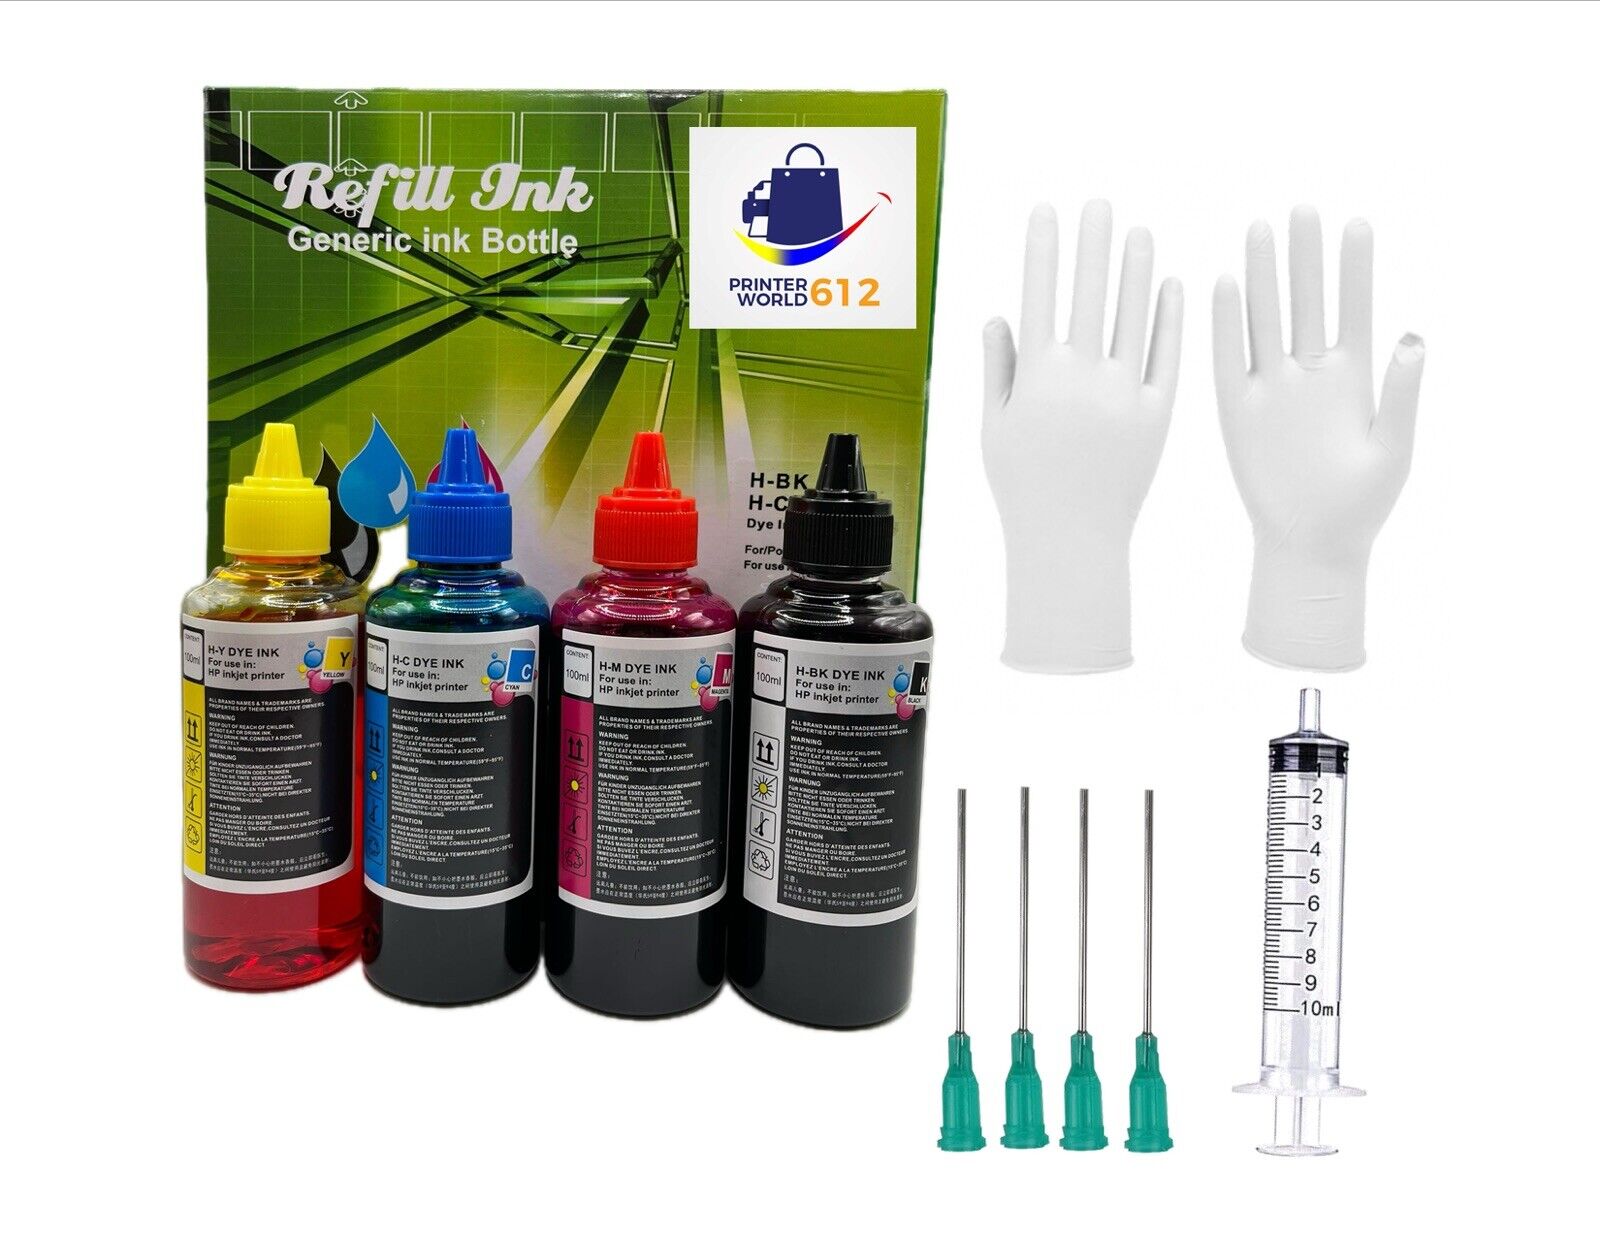 400ML Ink for HP Printer Ink Refill Kit HP 60 61 62 63 64 65 67 910 950 951 564.